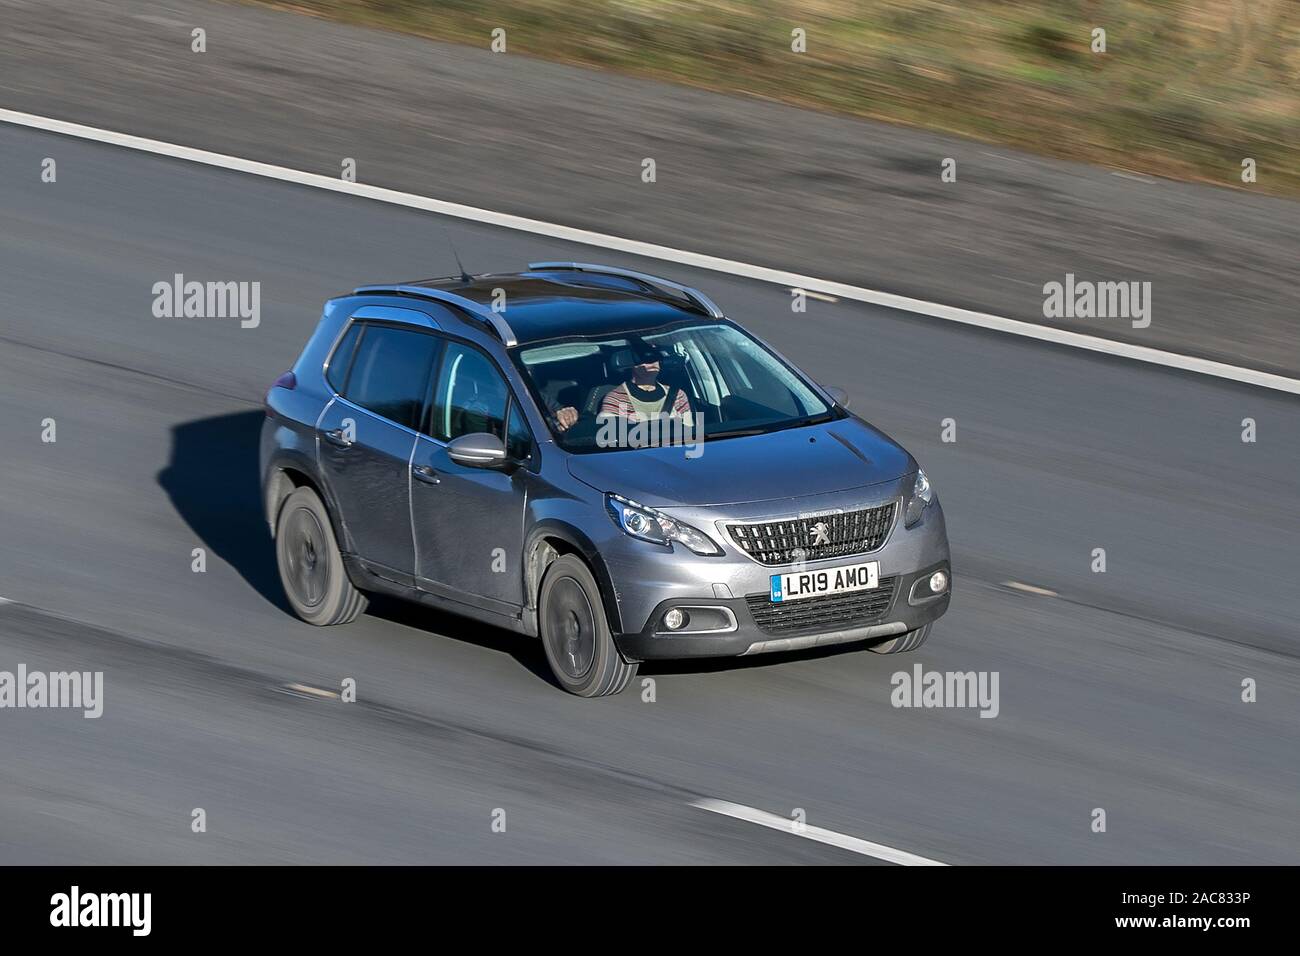 Blurred moving car 2019 Peugeot 2008 Allure Premium traveling at speed on the M61 motorway Slow camera shutter speed vehicle movement Stock Photo